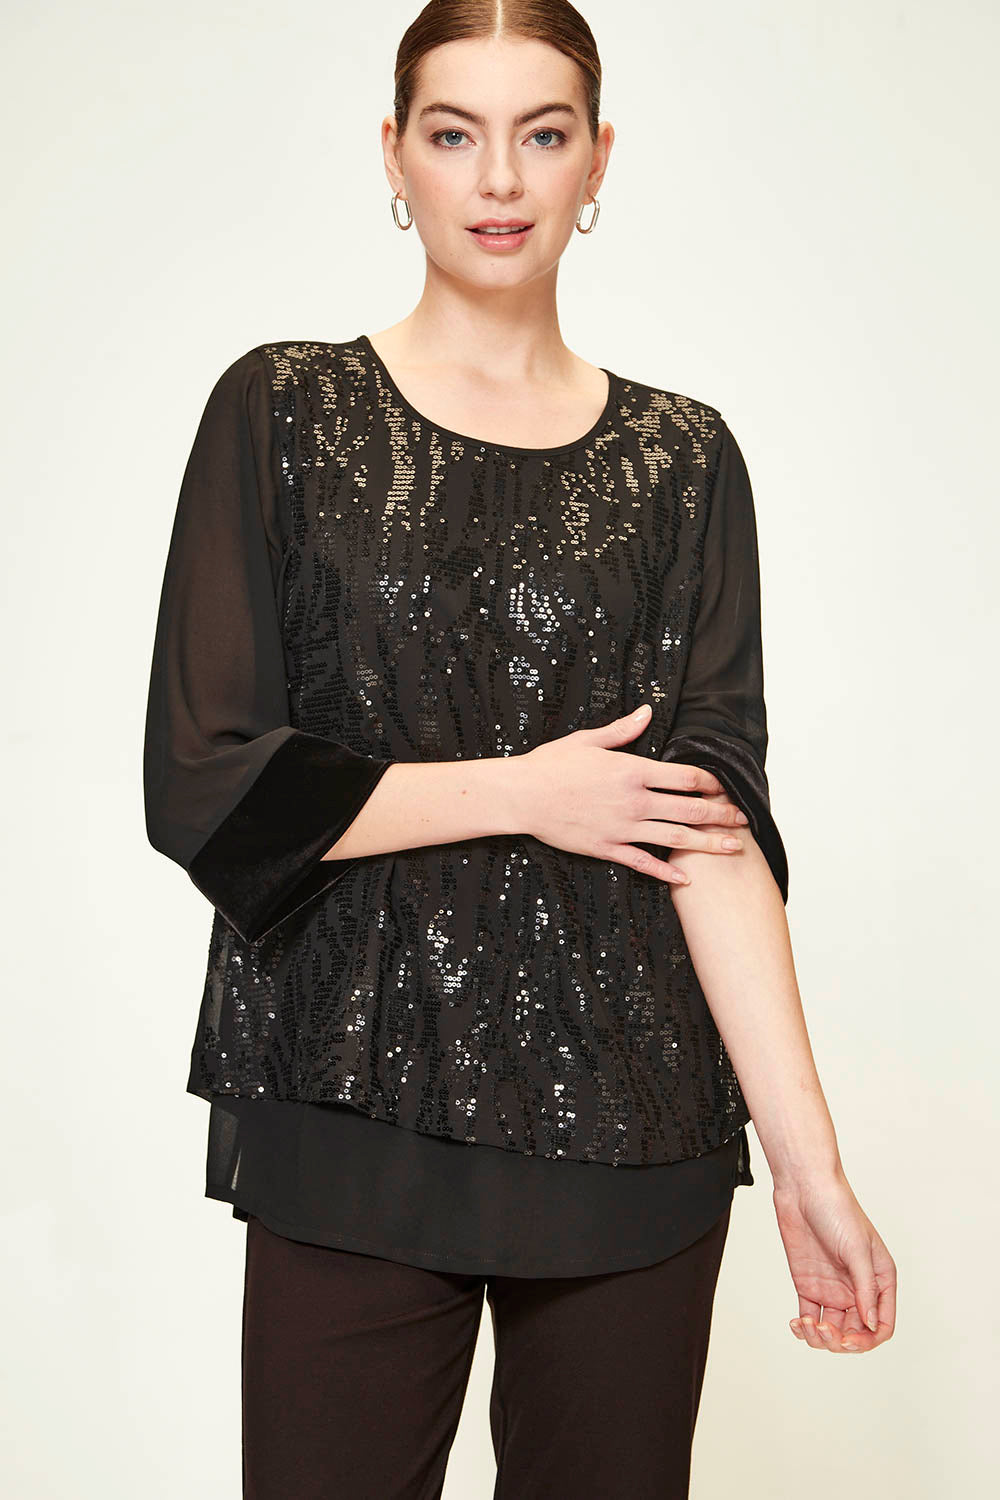 Verge Glamour Top 9153JX